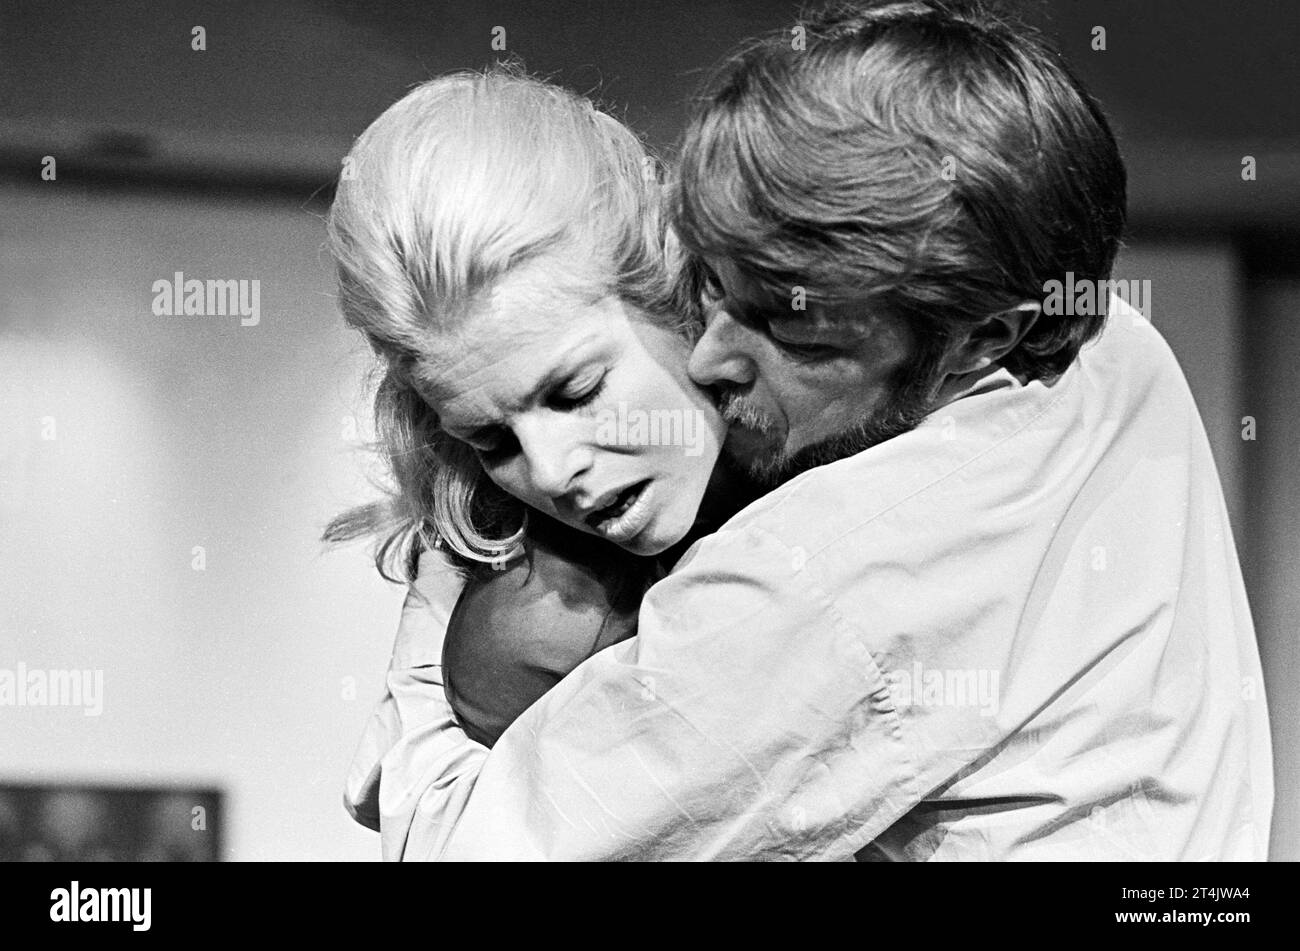 Mary Peach (Gail), Brian Smith (Guy) in DON'T GAS THE BLACKS by Barry Reckord  at the Open Space Theatre, London WC1  21/10/1969           design: Len Drinkwater  director: Lloyd Reckord Stock Photo